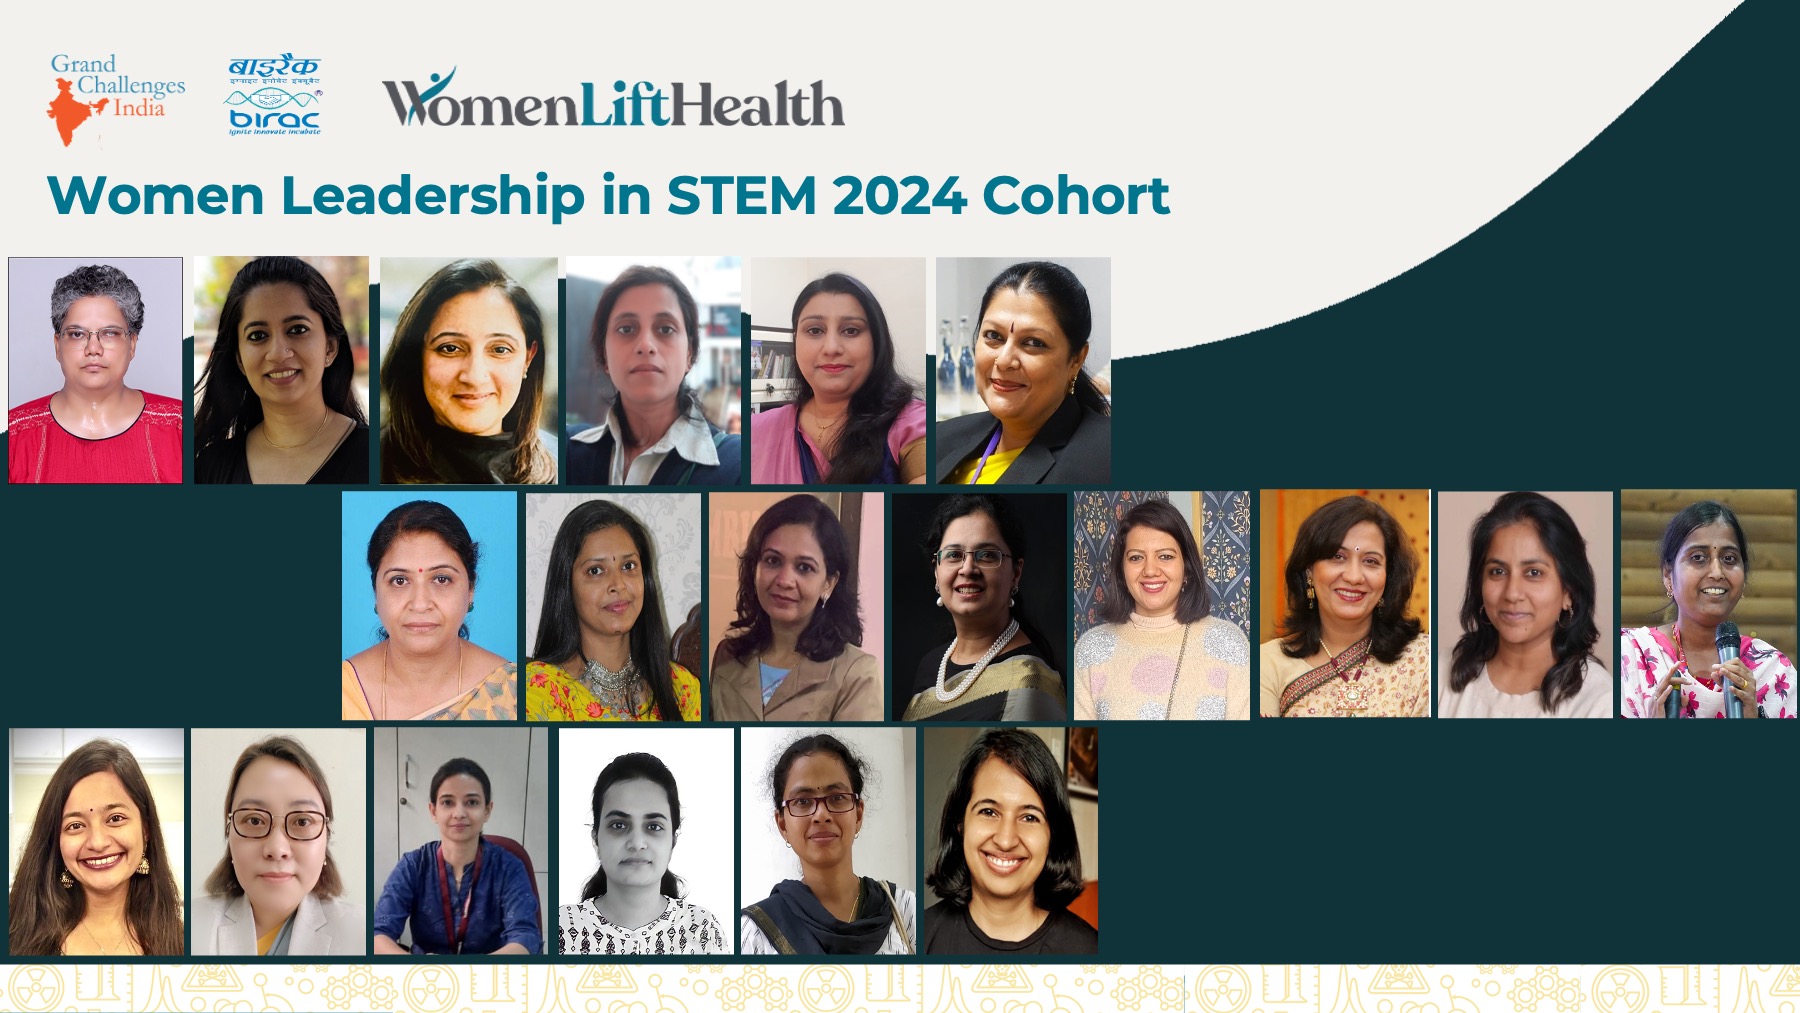 Driving Impact in Gender Equality in STEM: Grand Challenges India, BIRAC, and WomenLift Health Launch Inaugural Women Leadership in STEM Program